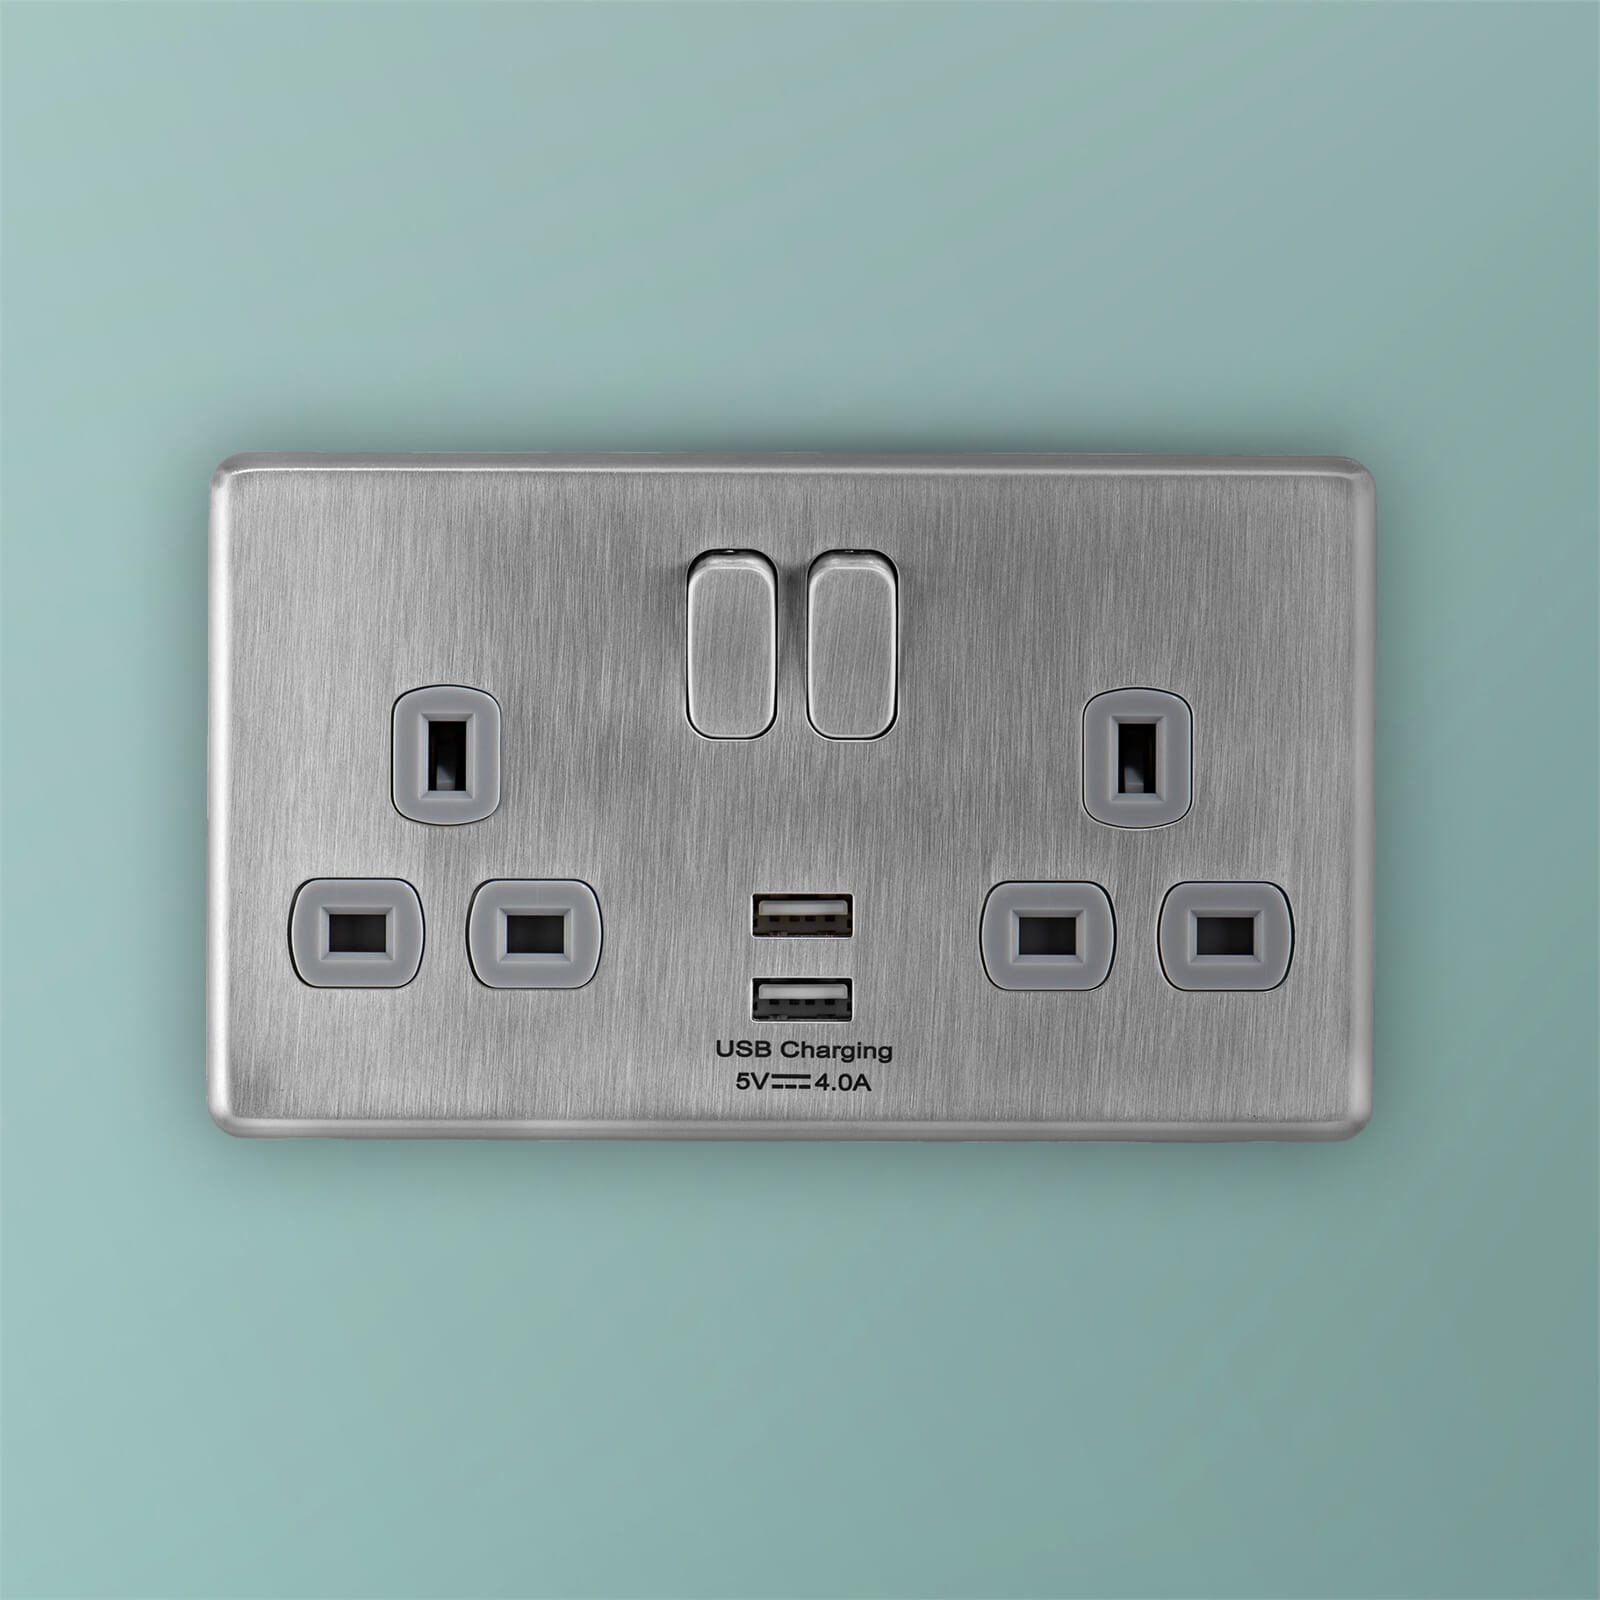 Arlec Fusion 13A 2 Gang Stainless Steel Double switched socket with 2x4A USB